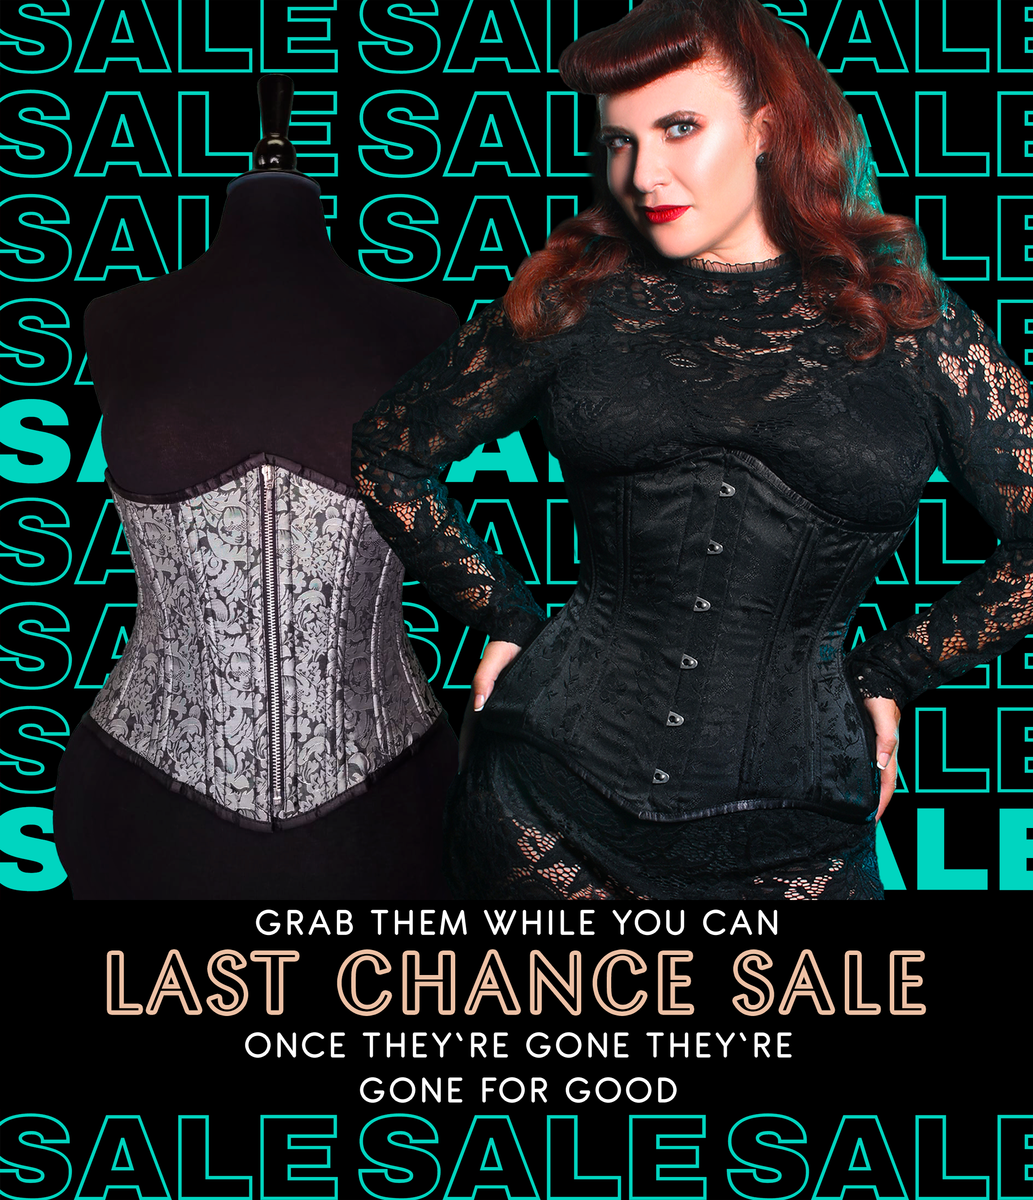 Exquisite Steel Boned Corsets, Maid Uniforms and Alternative